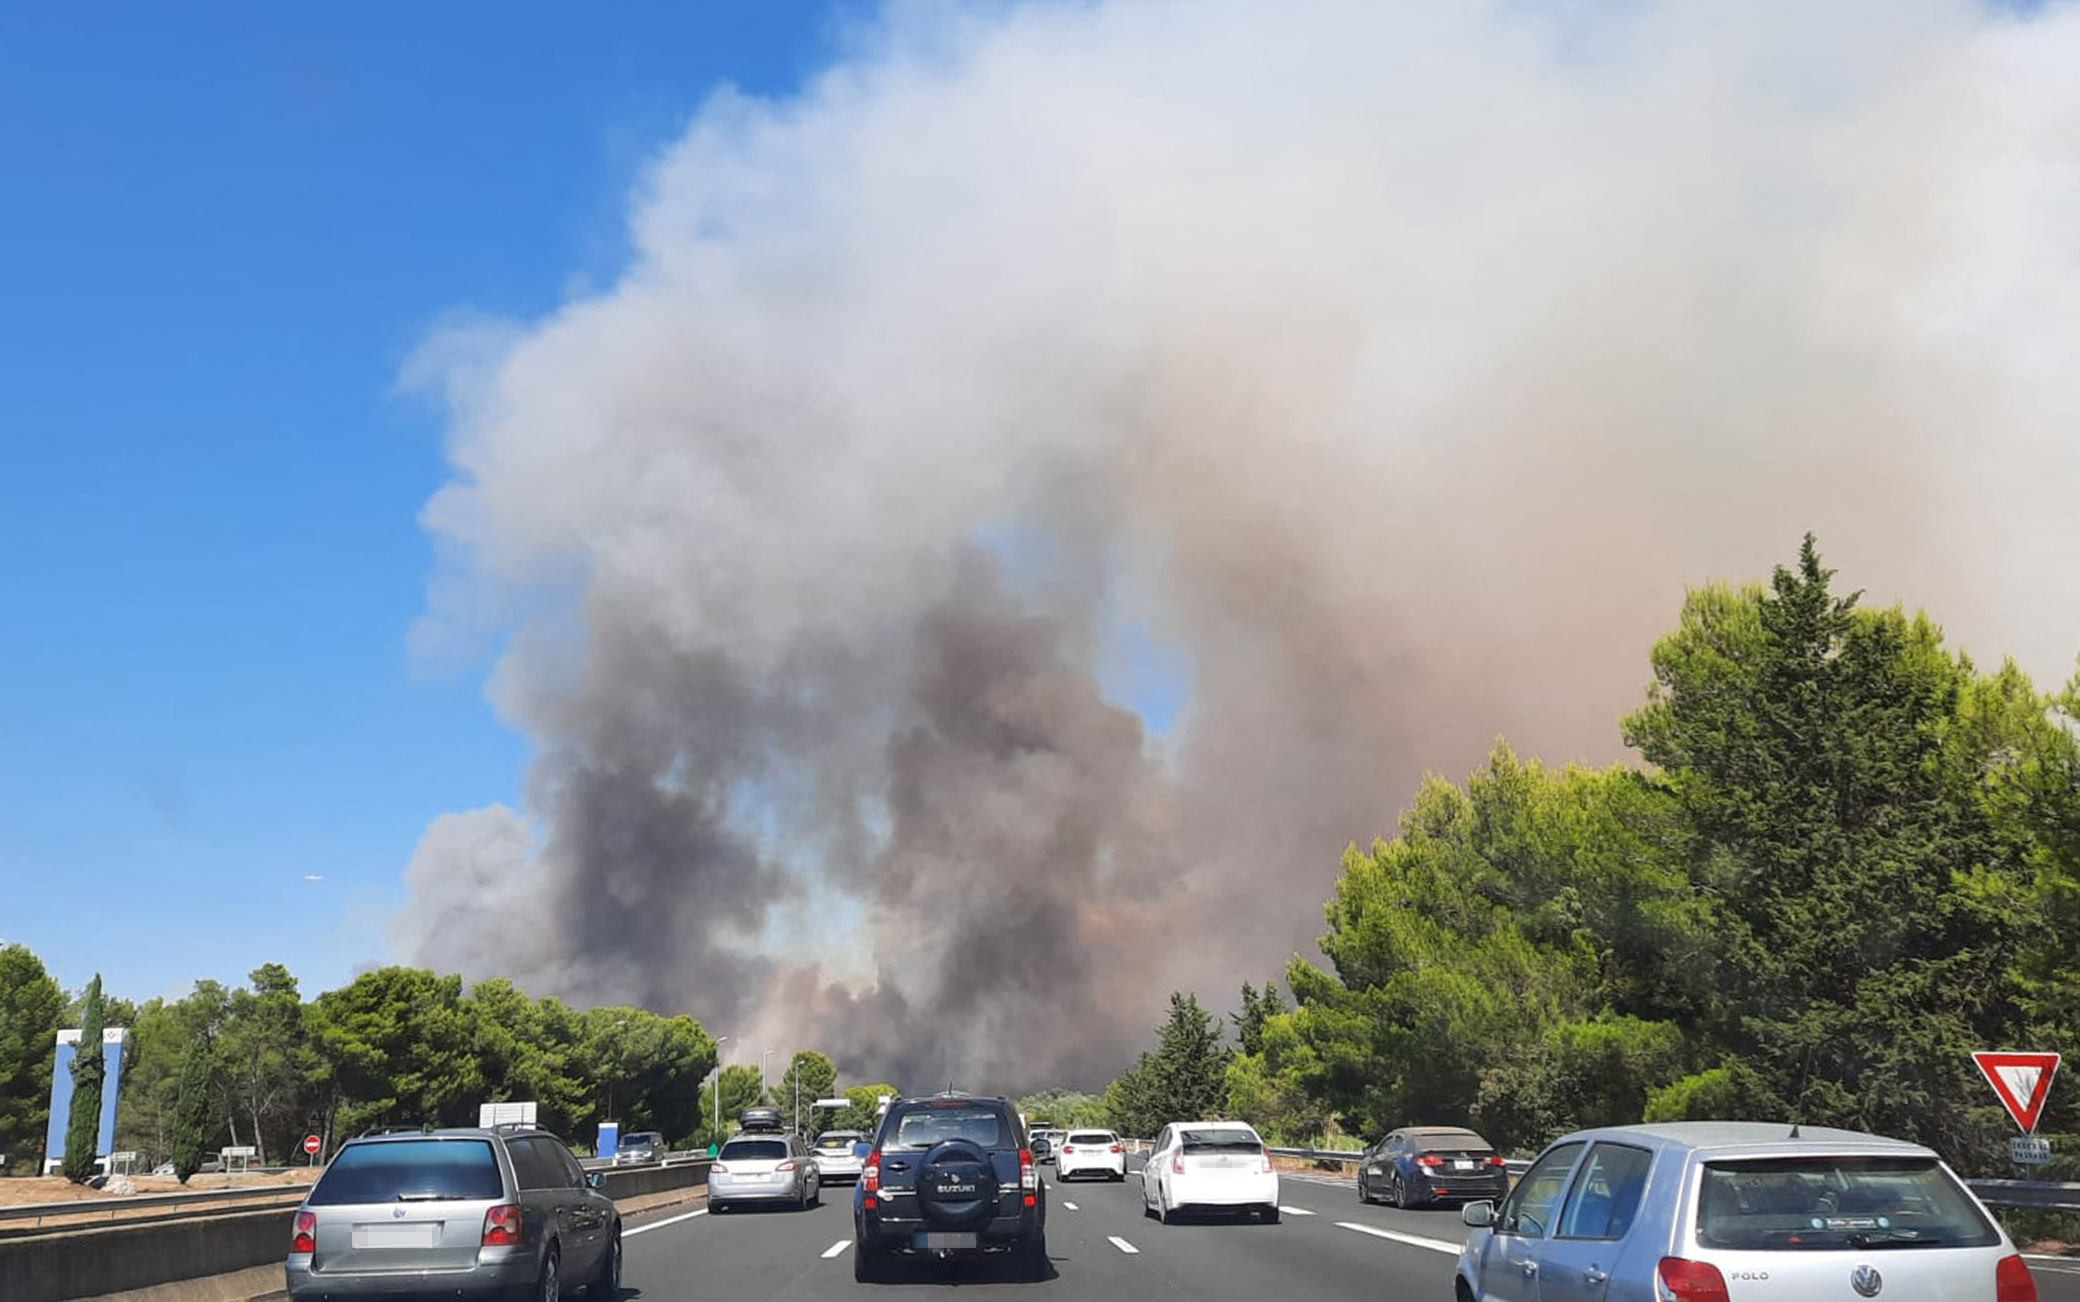 This image taken from a car window along a highway on July 31, 2022, shows thick white smoke from a fire near Aubais, southern France.  - According to the French Interior Minister, the fire has taken out 200 hectares and injured four firefighters.  (Photo by Benjamin GALY / AFP) (Photo by BENJAMIN GALY / AFP via Getty Images)